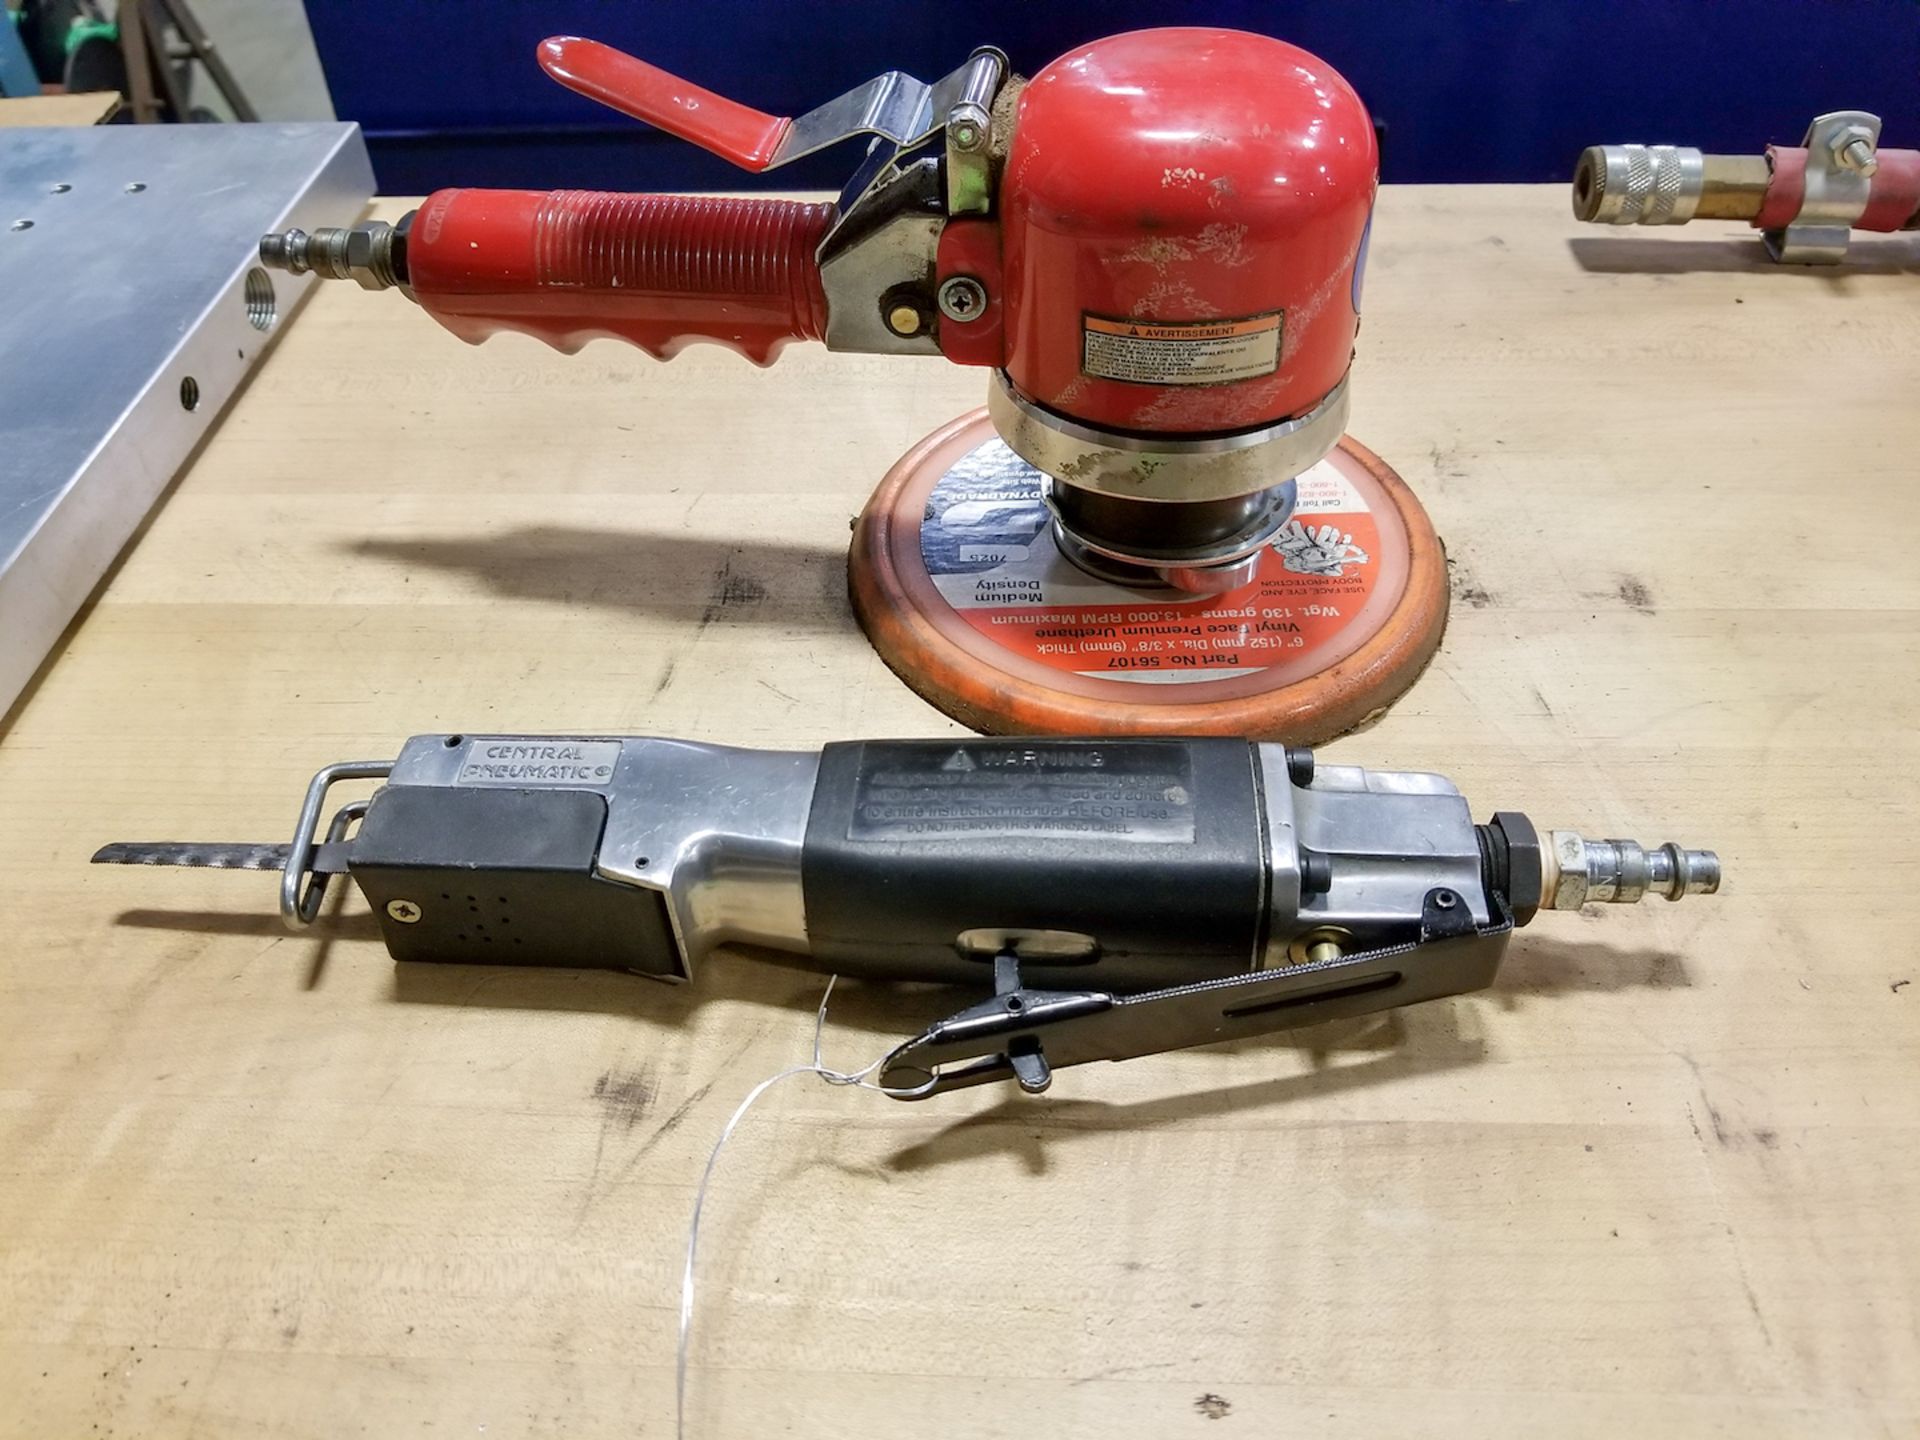 Assorted Pneumatic Tools to Include: (1) Central Pneumatics Reciprocating Saw; (1) 6" Sander